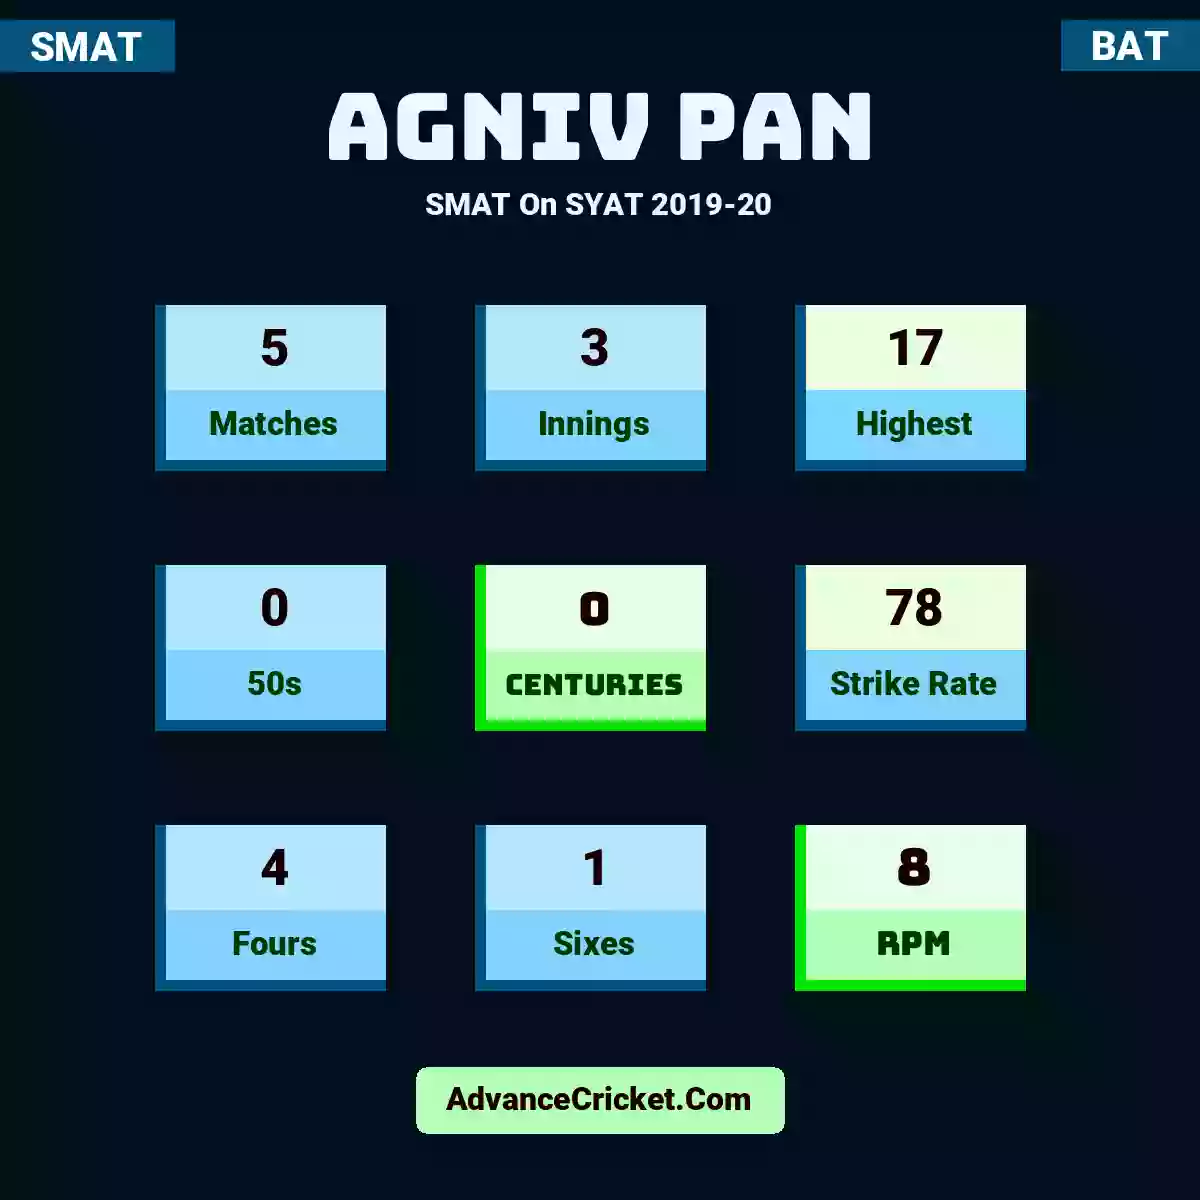 Agniv Pan SMAT  On SYAT 2019-20, Agniv Pan played 5 matches, scored 17 runs as highest, 0 half-centuries, and 0 centuries, with a strike rate of 78. A.Pan hit 4 fours and 1 sixes, with an RPM of 8.